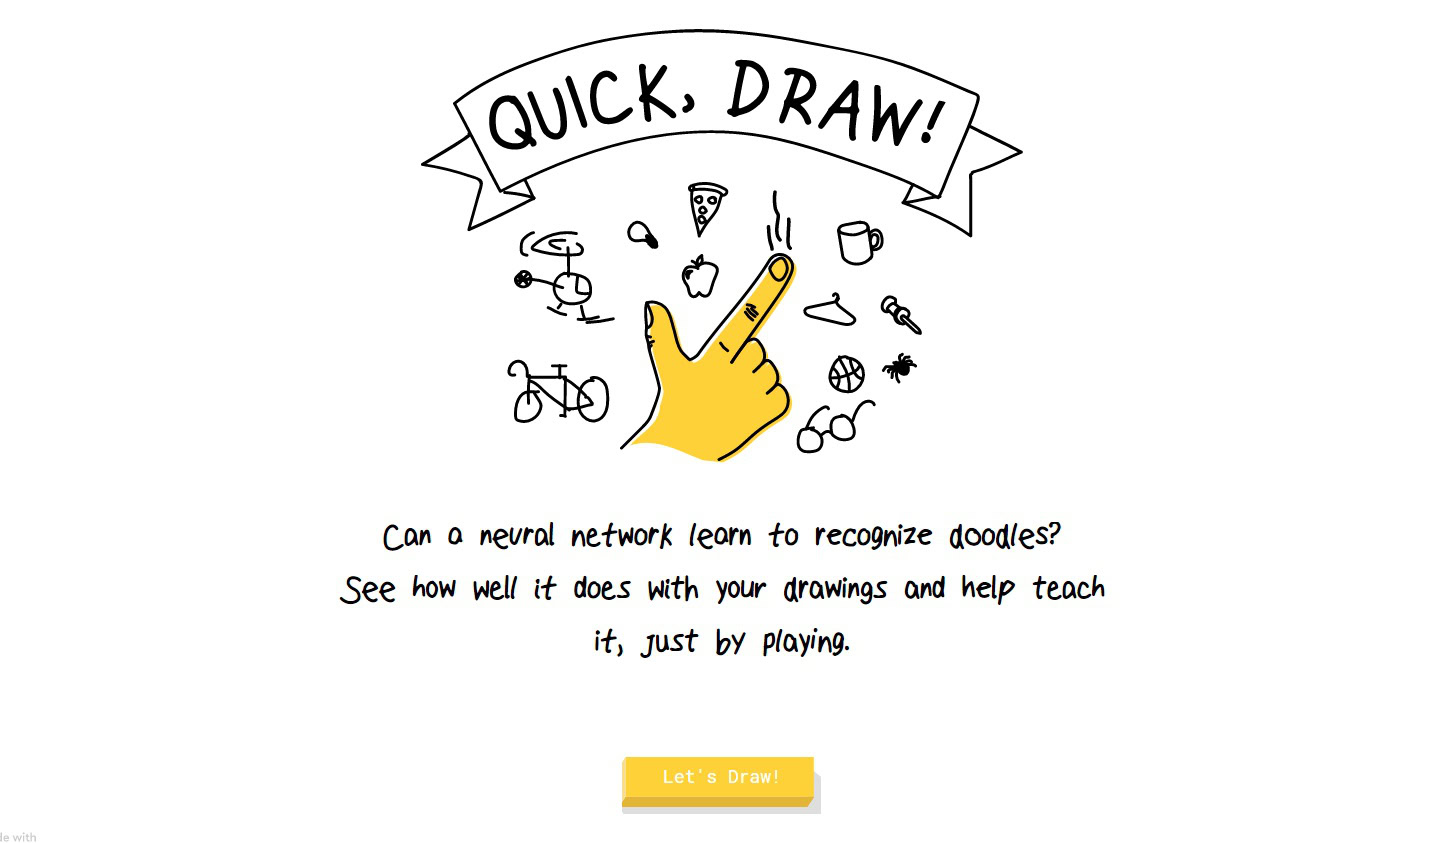 Quick, Draw pitches your awful drawing skills against Google's AI